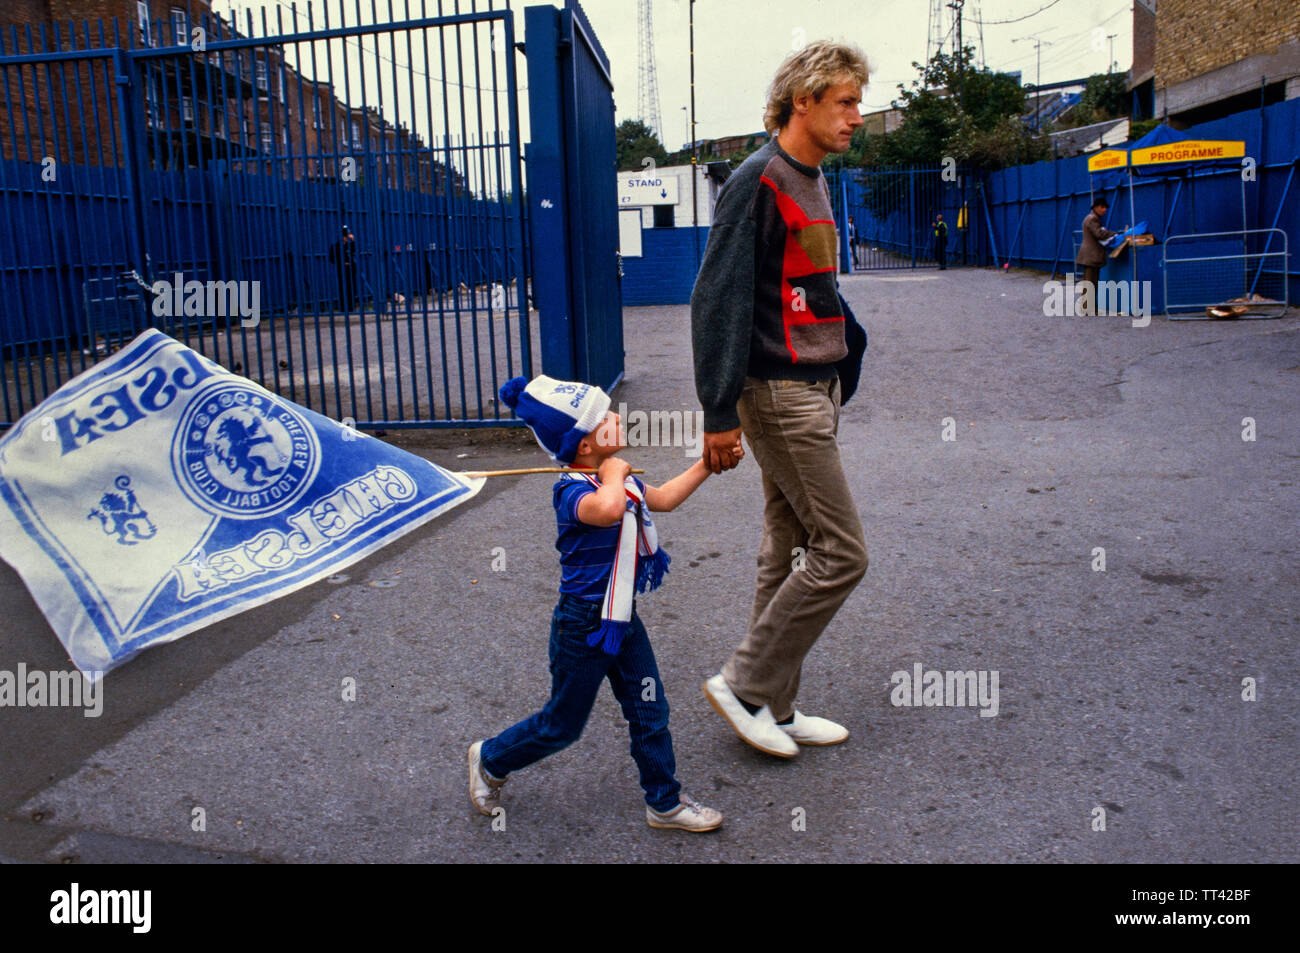 Chelsea FC supporters at Chelsea V Millwall football match 4 February 1985 at Chelsea, London England. 4 Feb 1985 Stock Photo